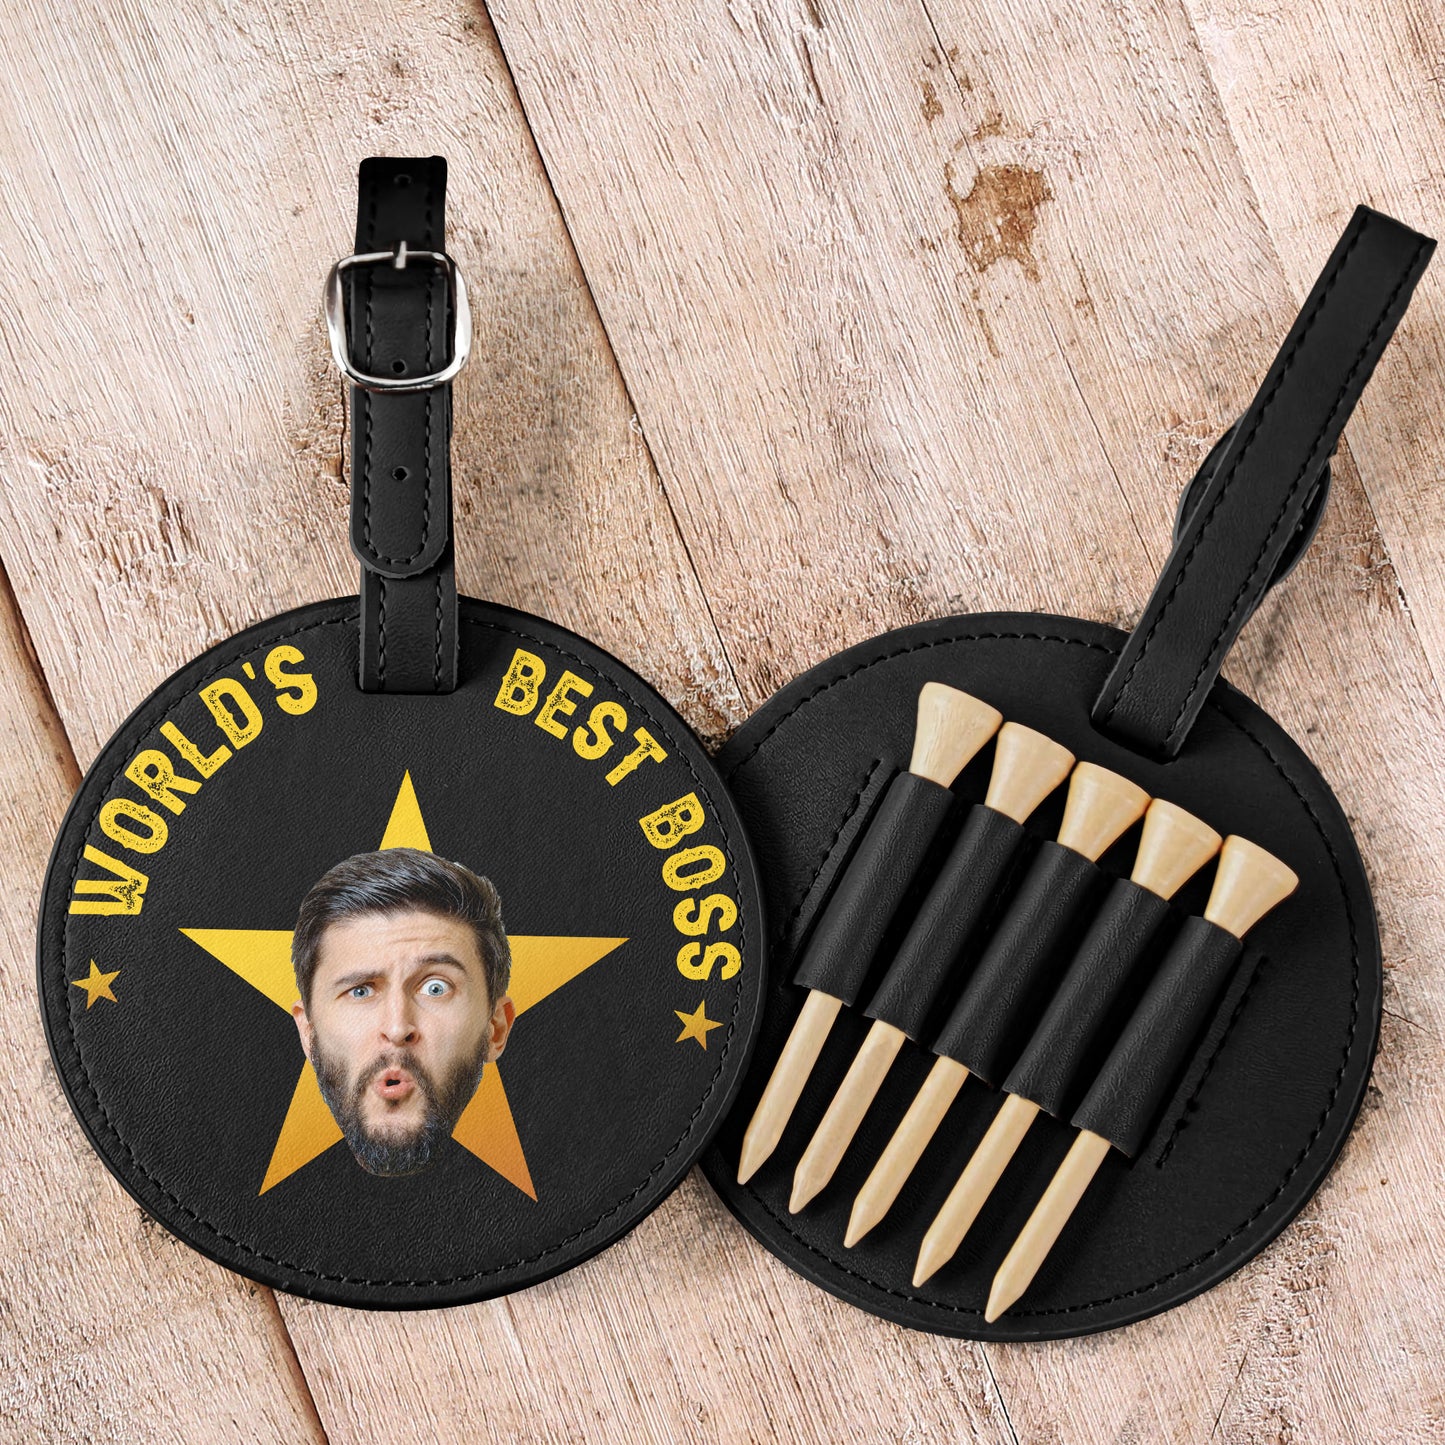 World's Best Boss - Personalized Photo Leather Golf Bag Tag